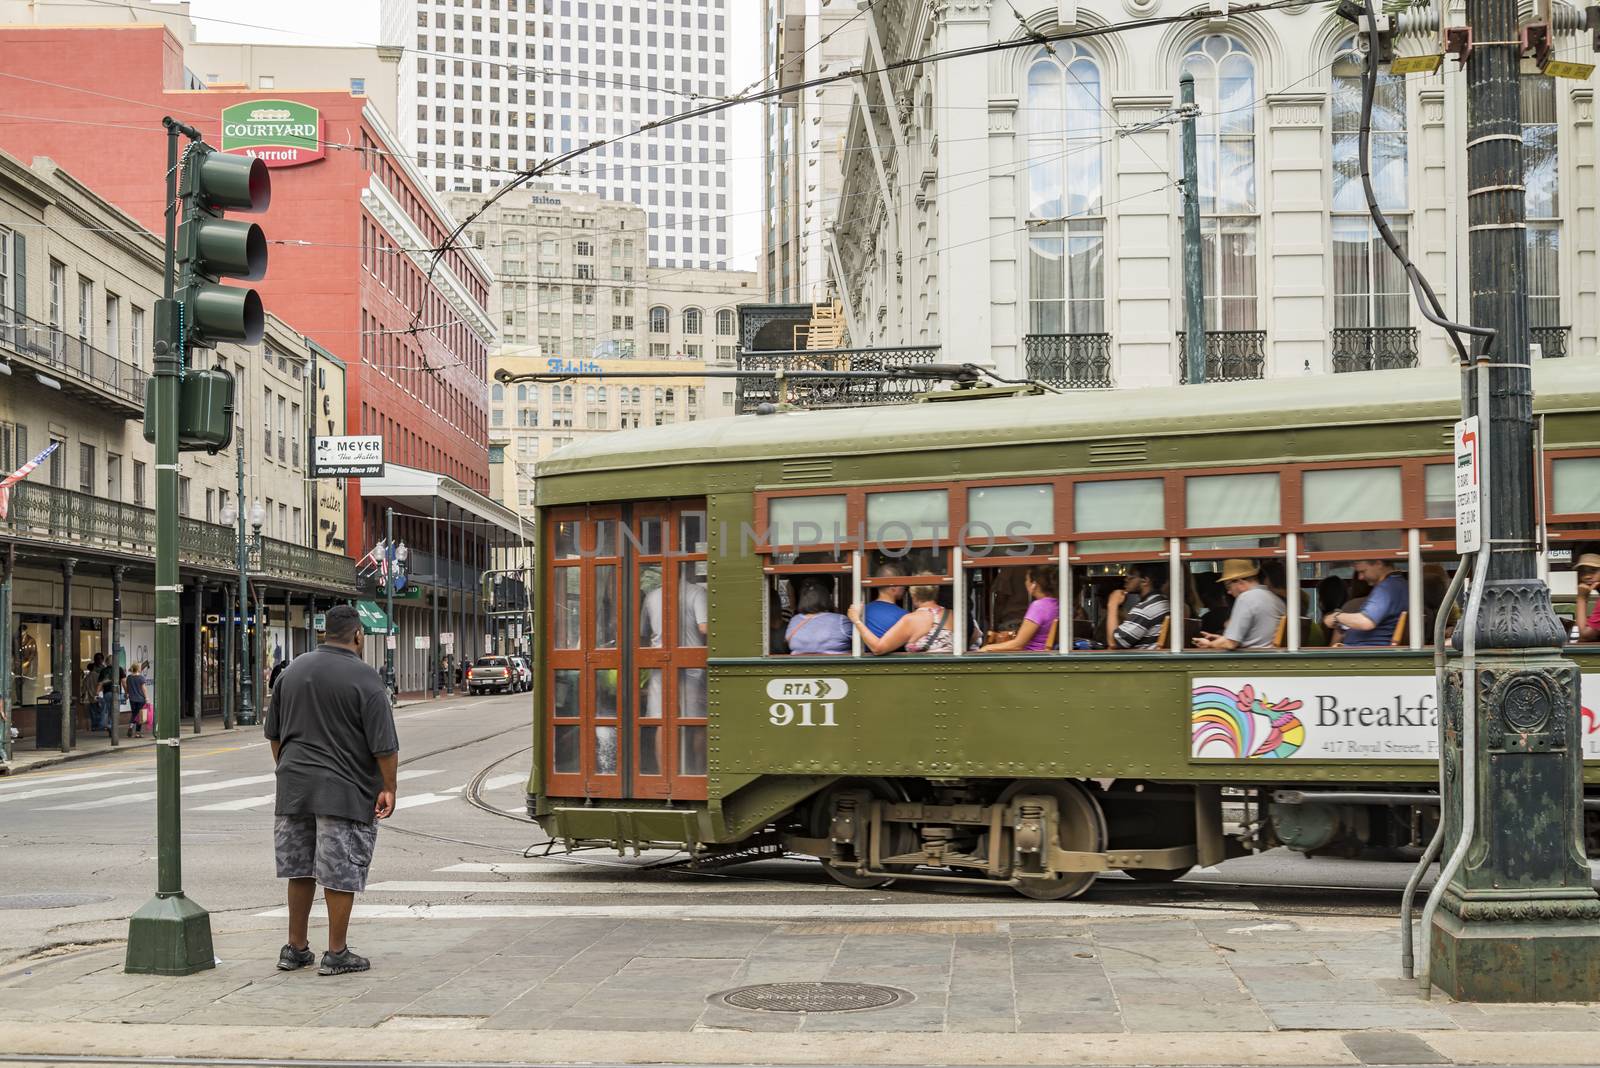 NEW ORLEANS, USA - OCTOBER 17: New Orleans Streetcar Line, on October 17, 2016. Newly revamped after Hurricane Katrina in 2005, the New Orleans Streetcar line began electric operation in 1893.